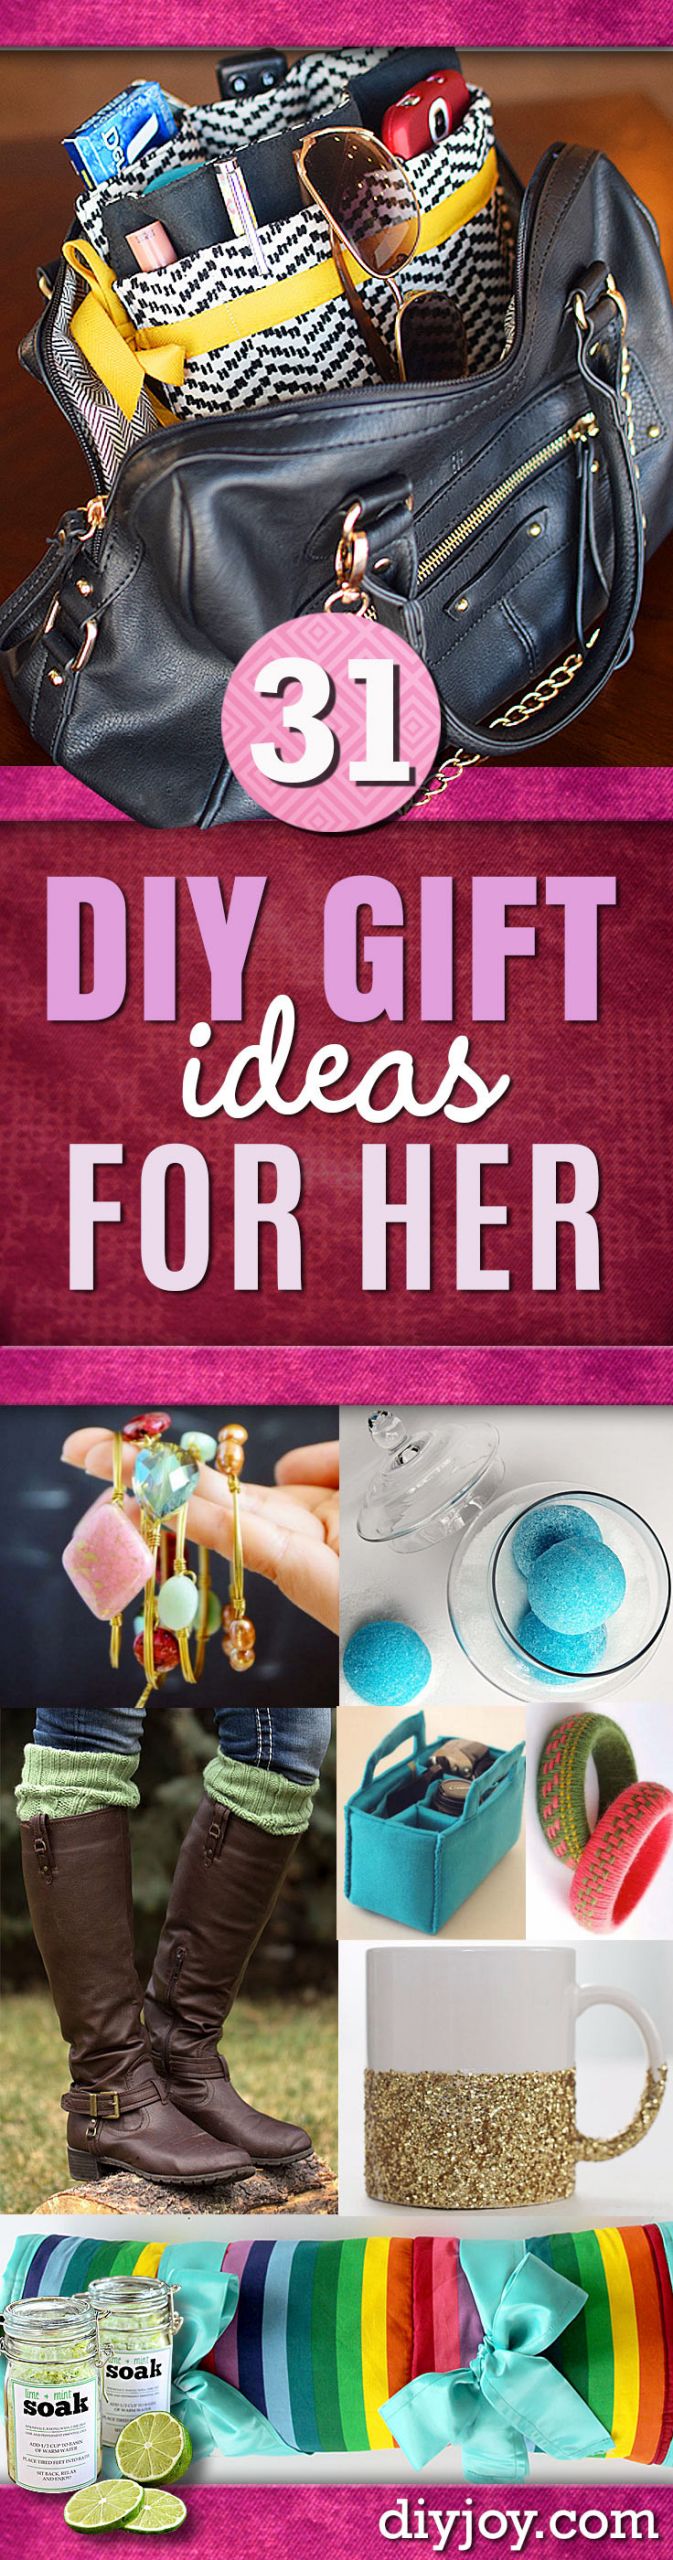 DIY Gifts For Wife
 DIY Gift Ideas for Her